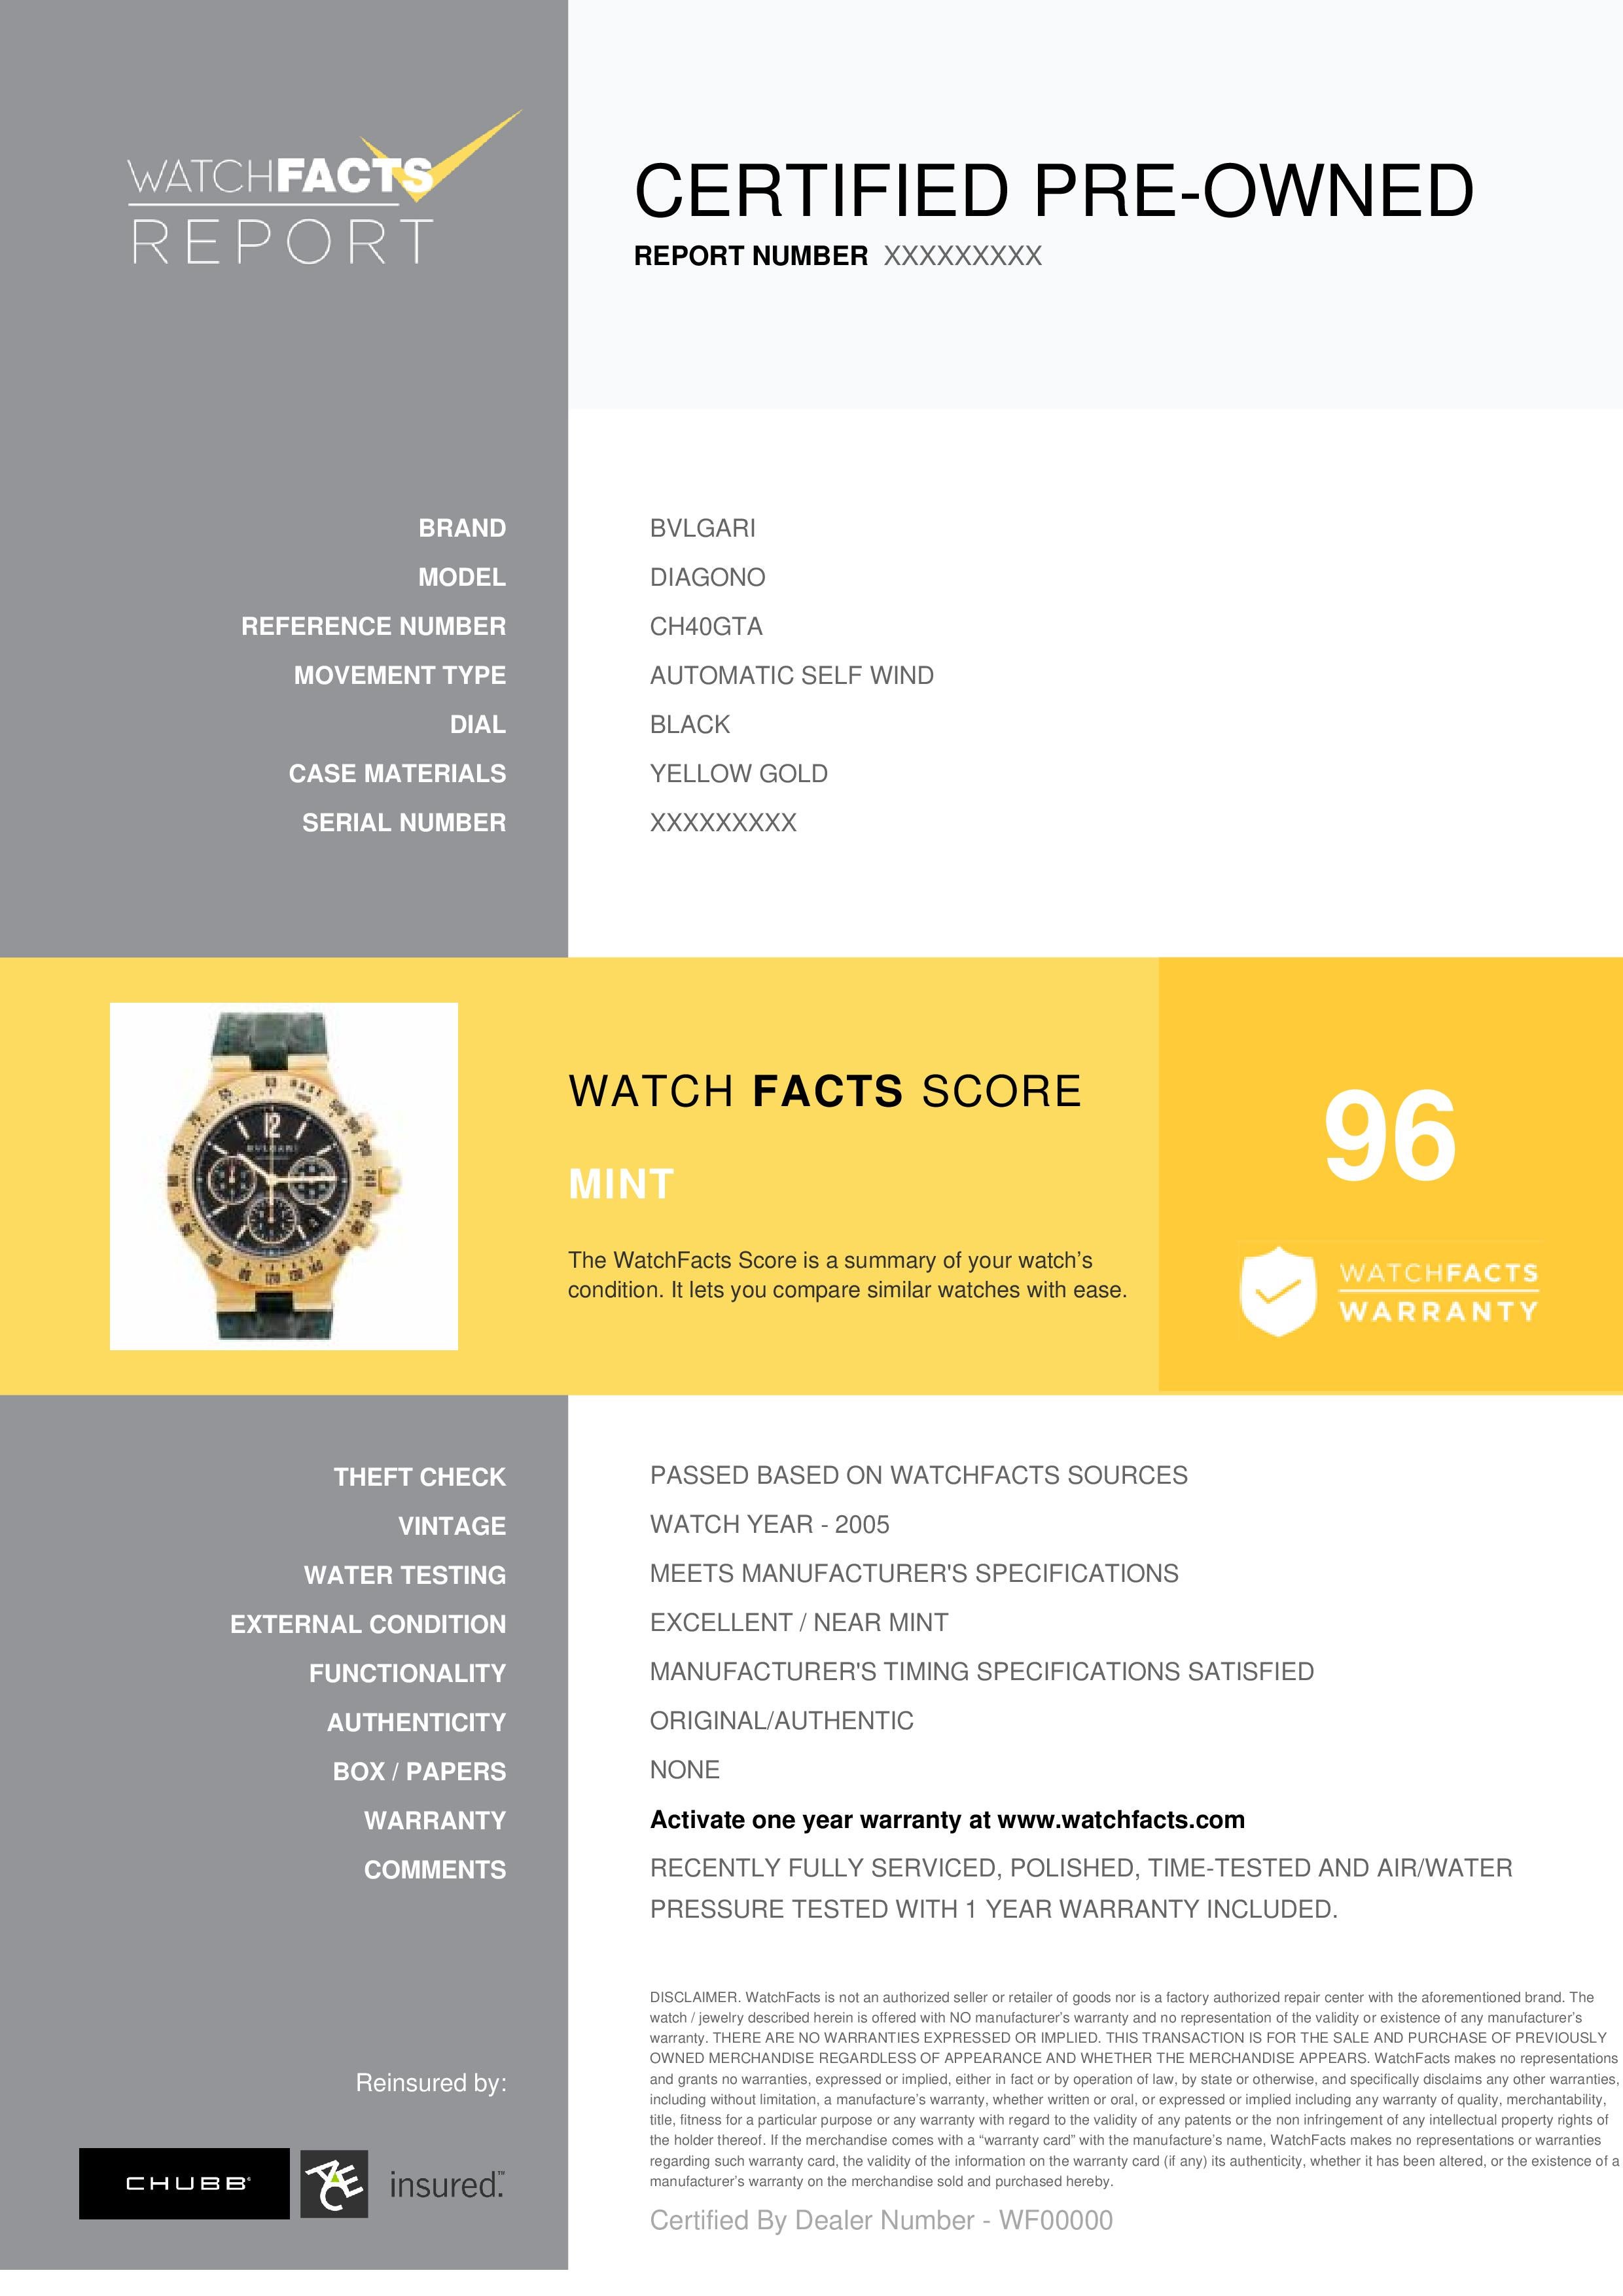 Bvlgari Diagono Reference #: CH40GTA. Mens Automatic Self Wind Watch Yellow Gold Black 40 MM. Verified and Certified by WatchFacts. 1 year warranty offered by WatchFacts.
